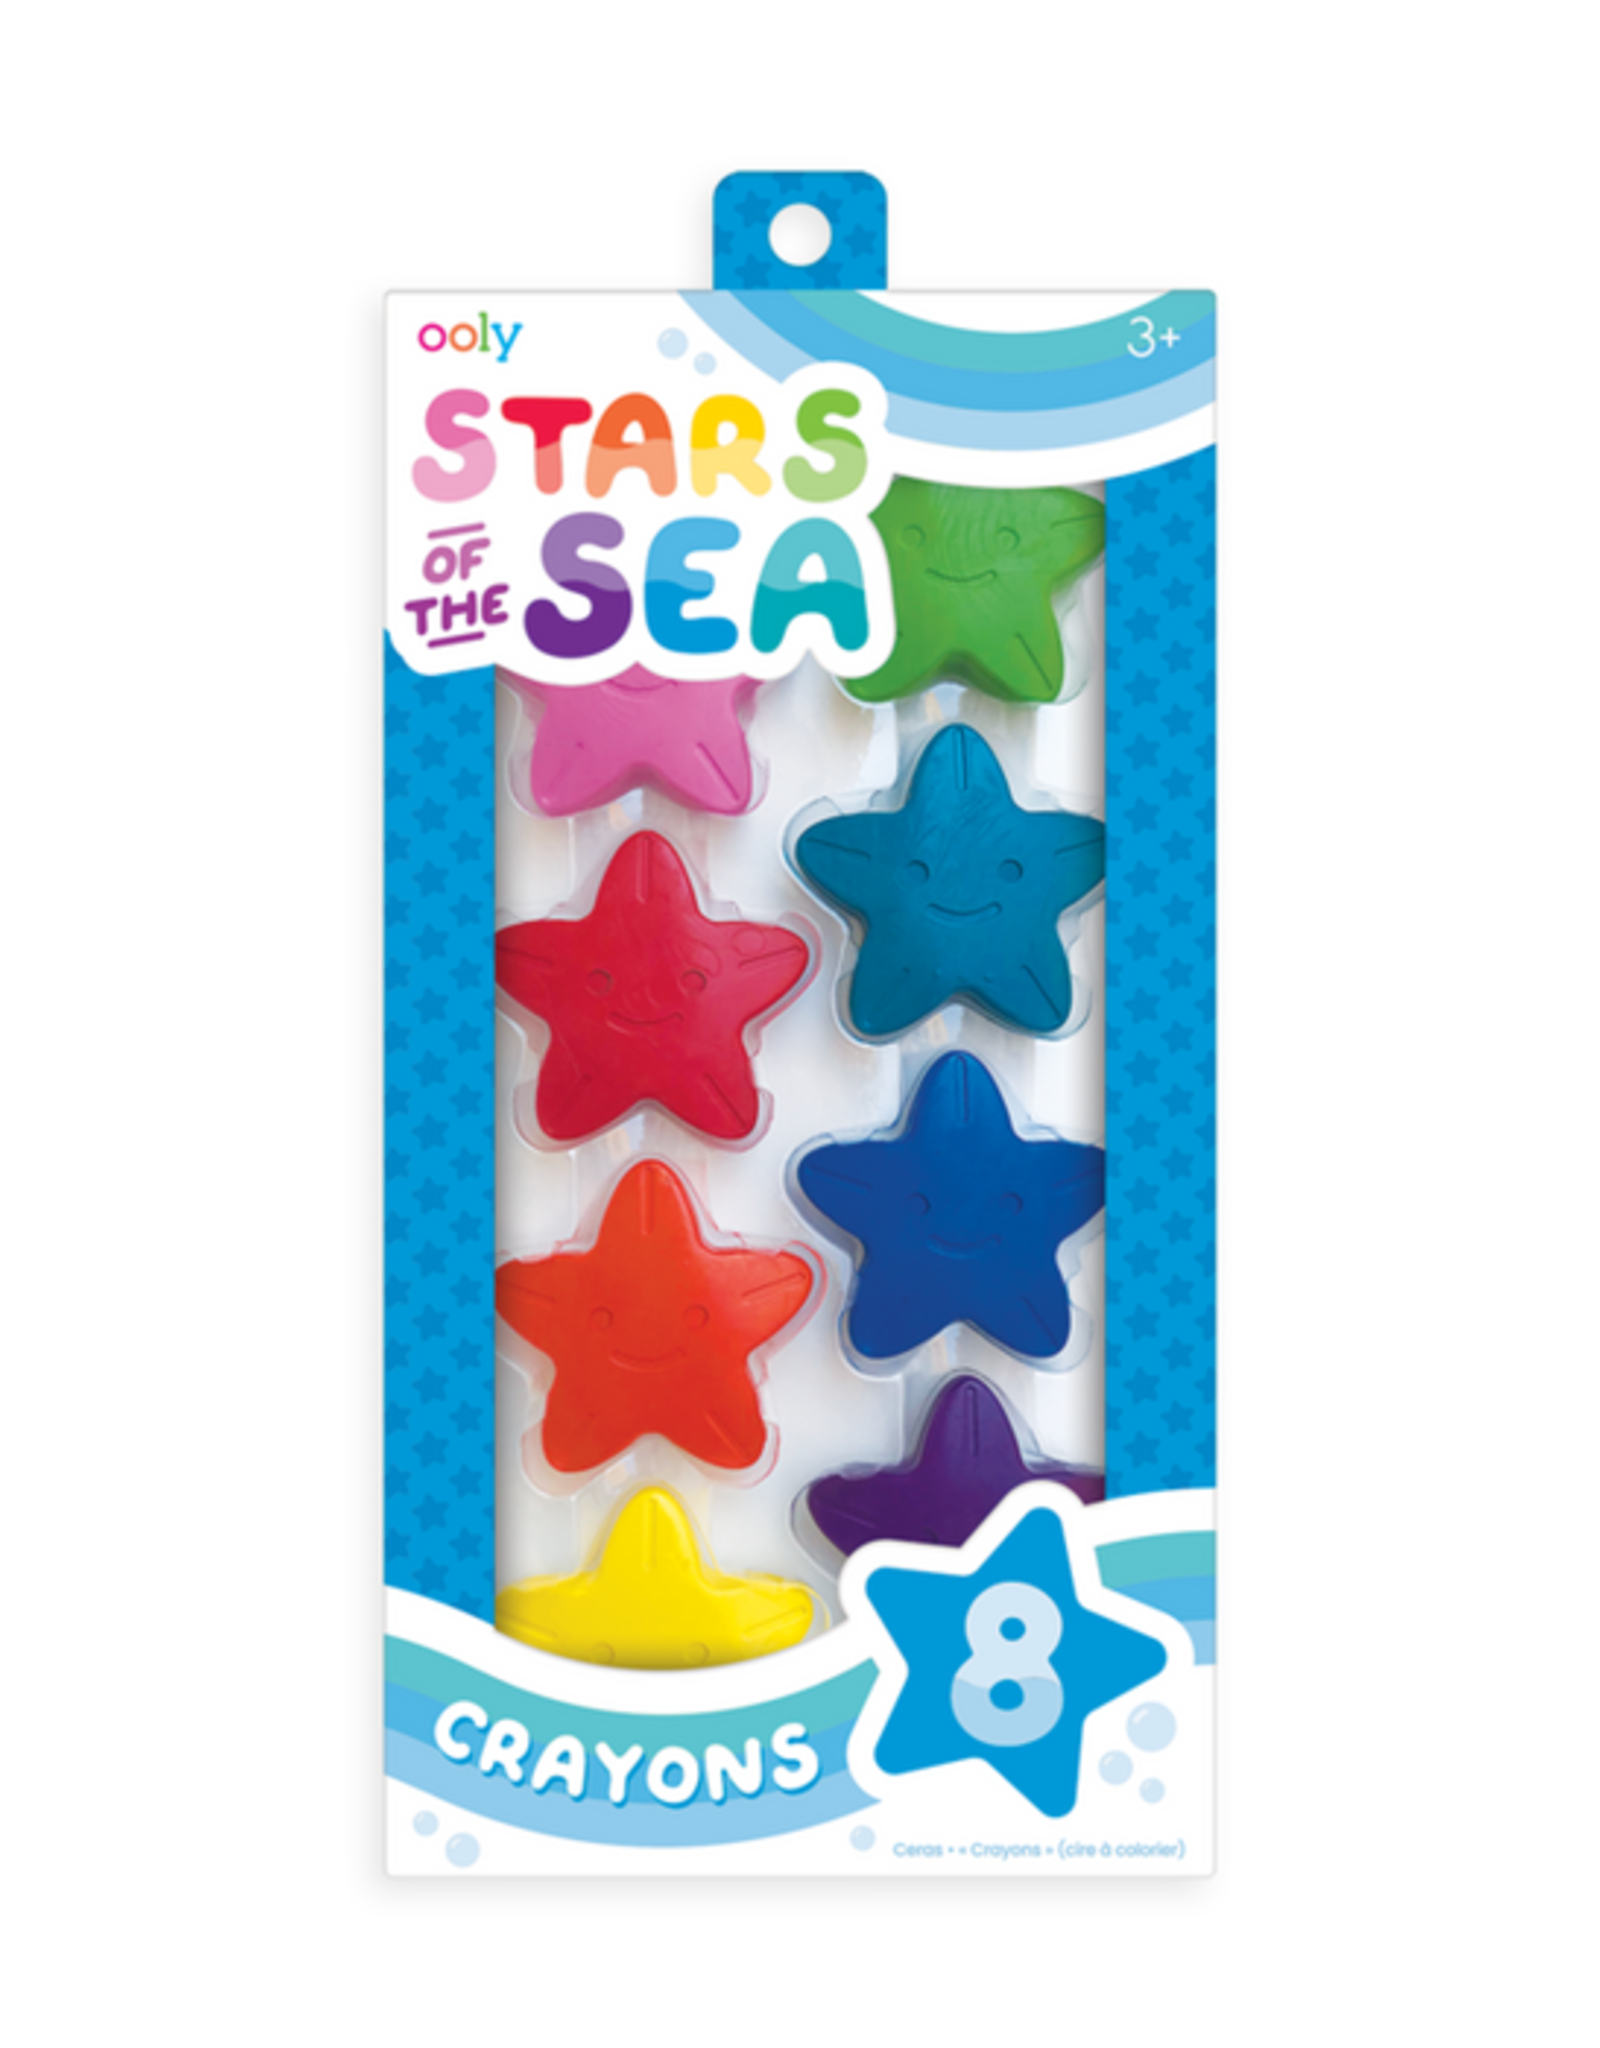 OOLY Star of the Sea Crayons - Set of 8